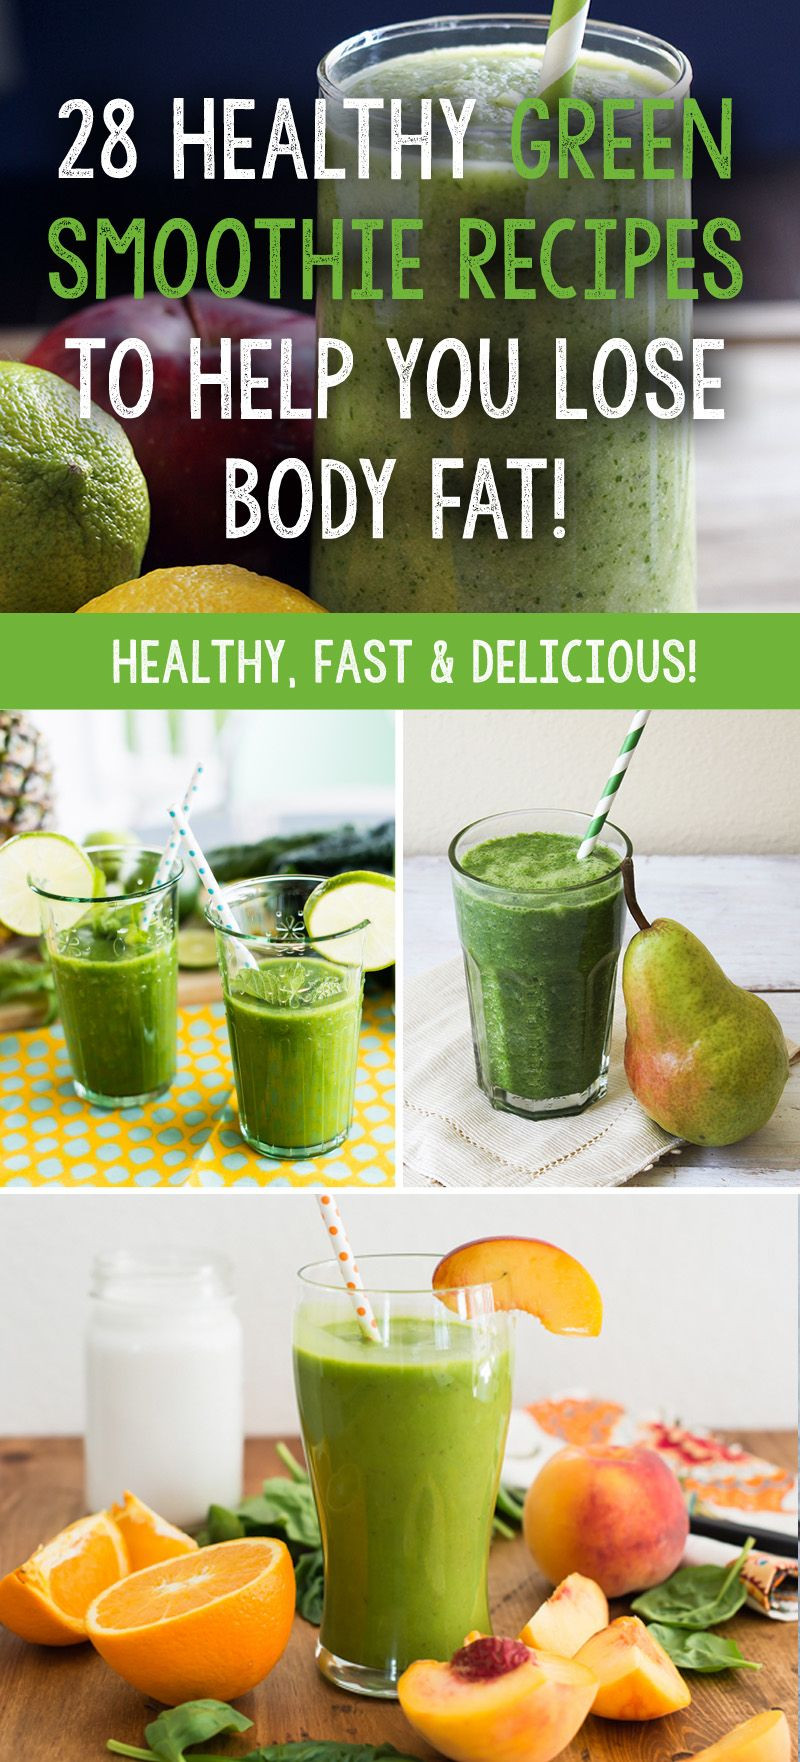 Weight Loss Smoothie Recipes Free
 28 Healthy Green Smoothie Recipes To Help You Lose Body